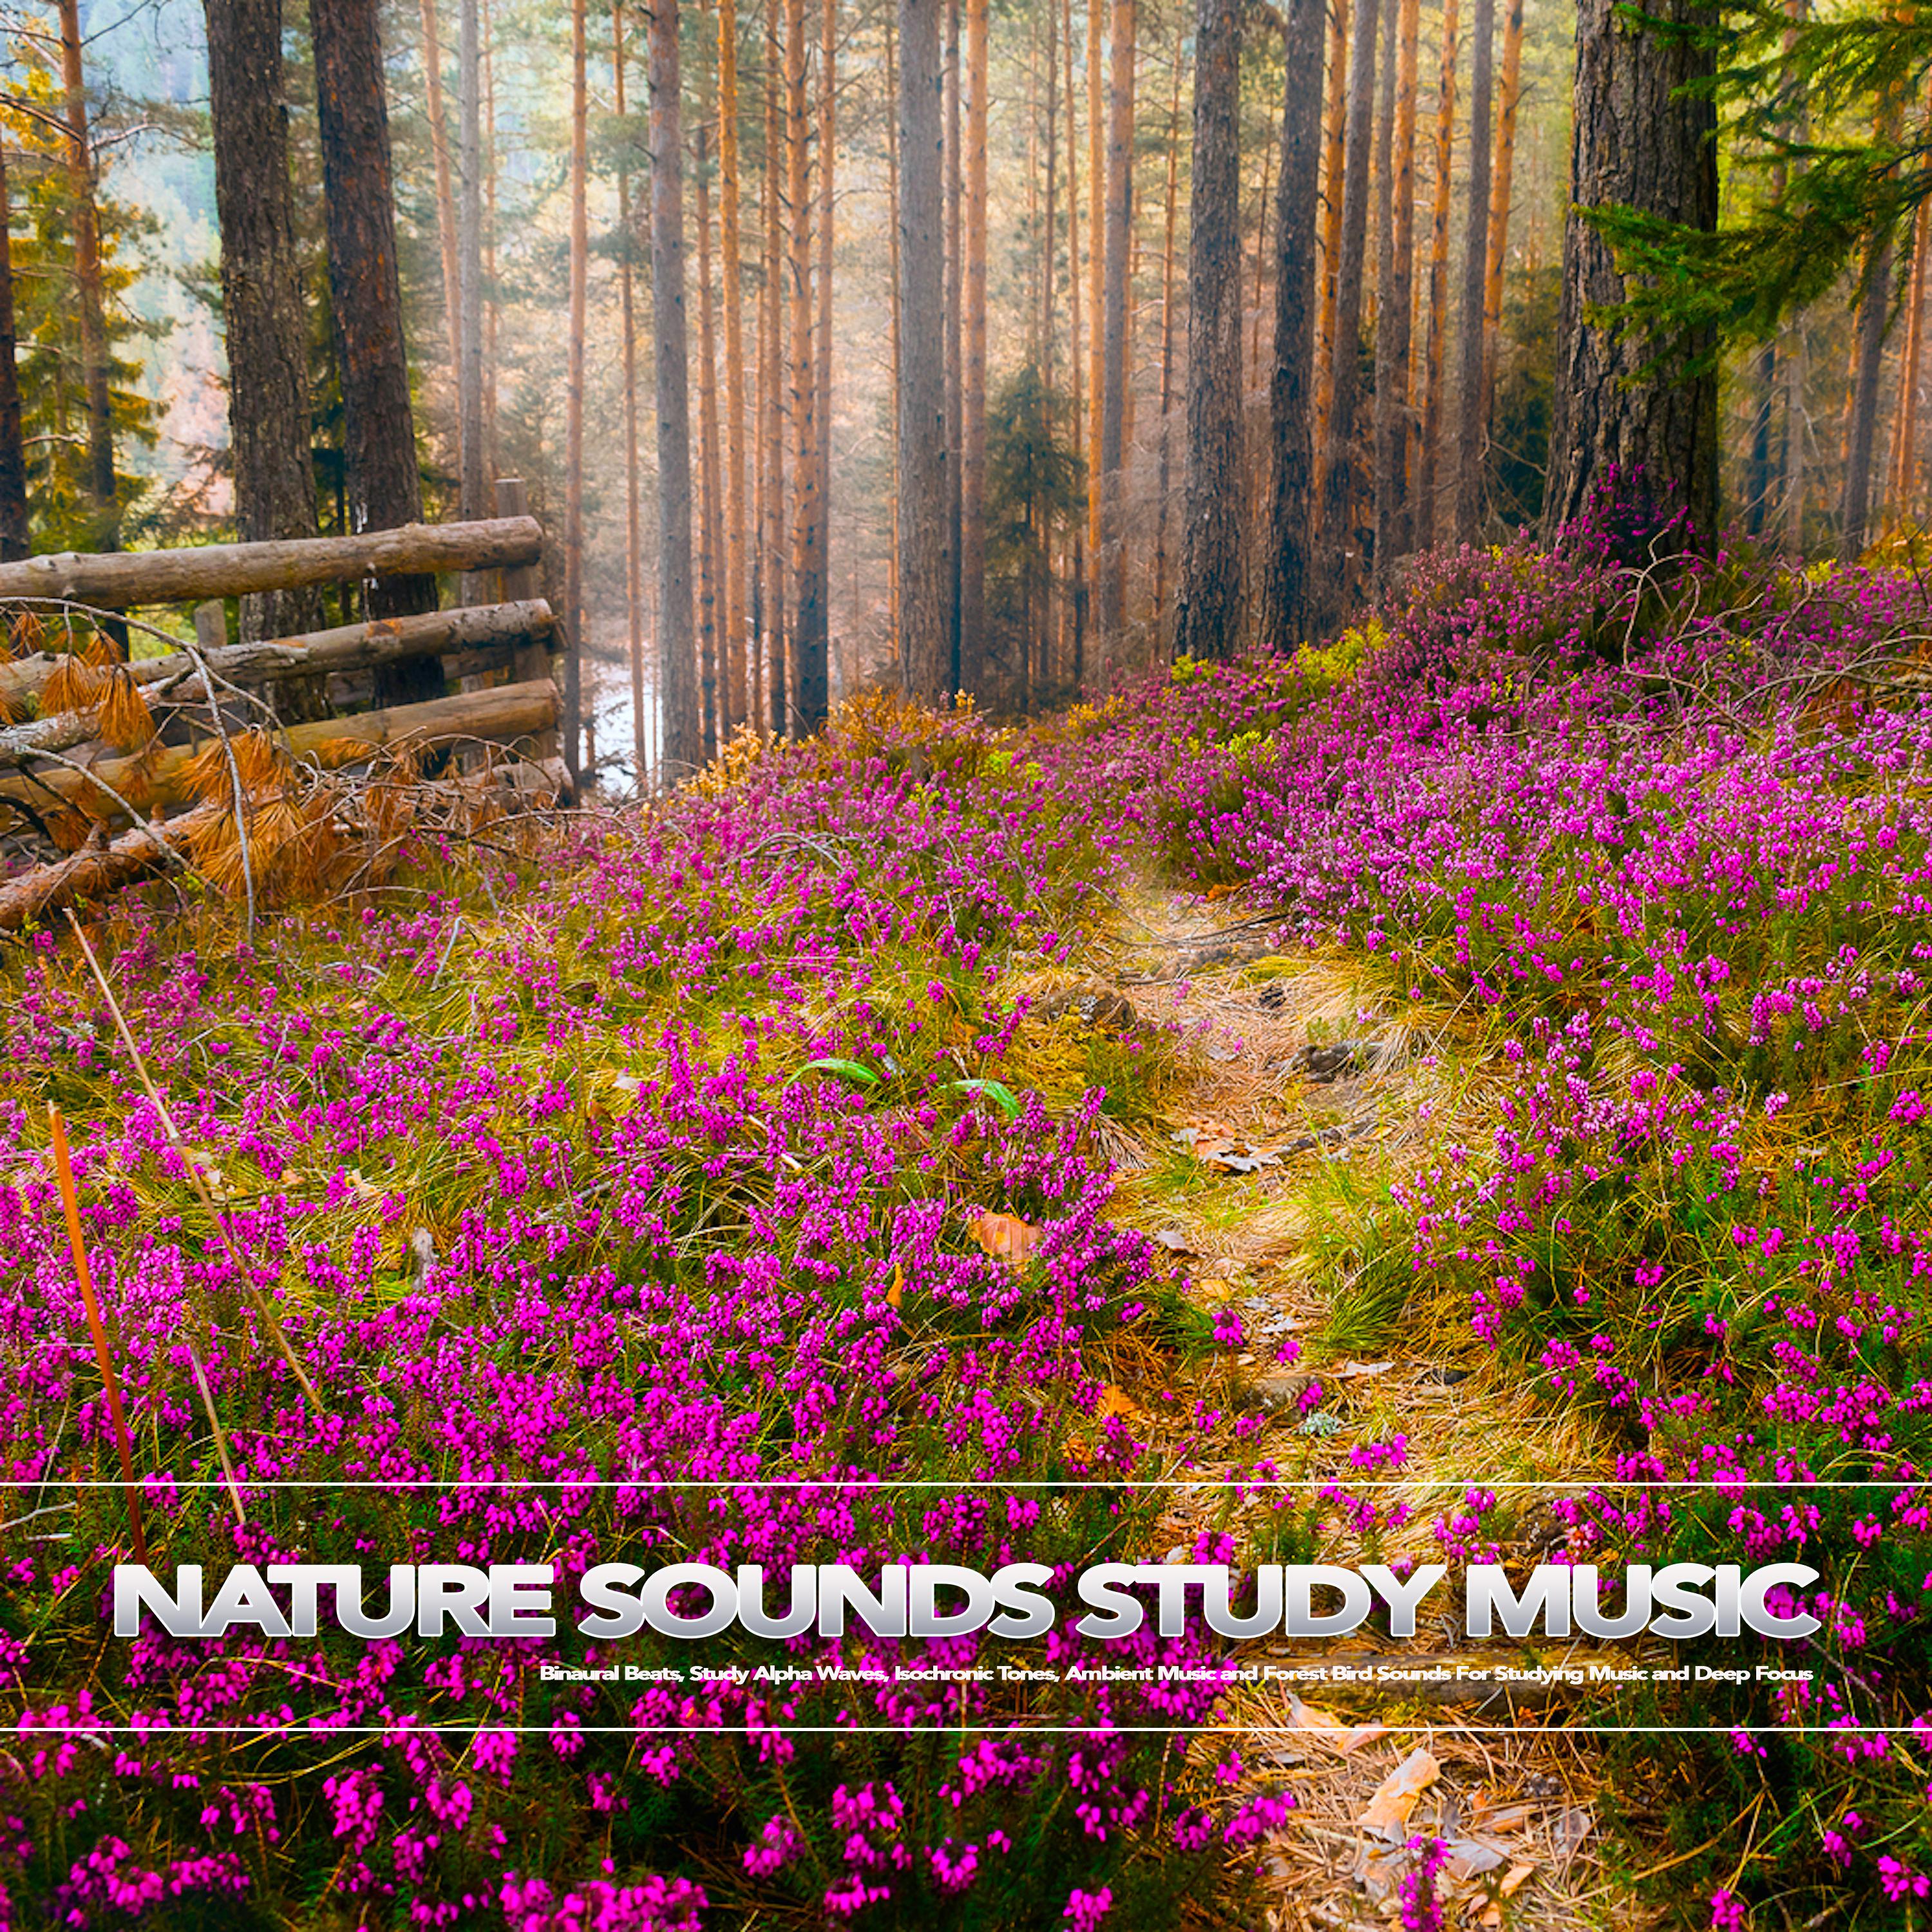 Nature Sounds Study Music: Binaural Beats, Study Alpha Waves, Isochronic Tones, Ambient Music and Forest Bird Sounds For Studying Music and Deep Focus